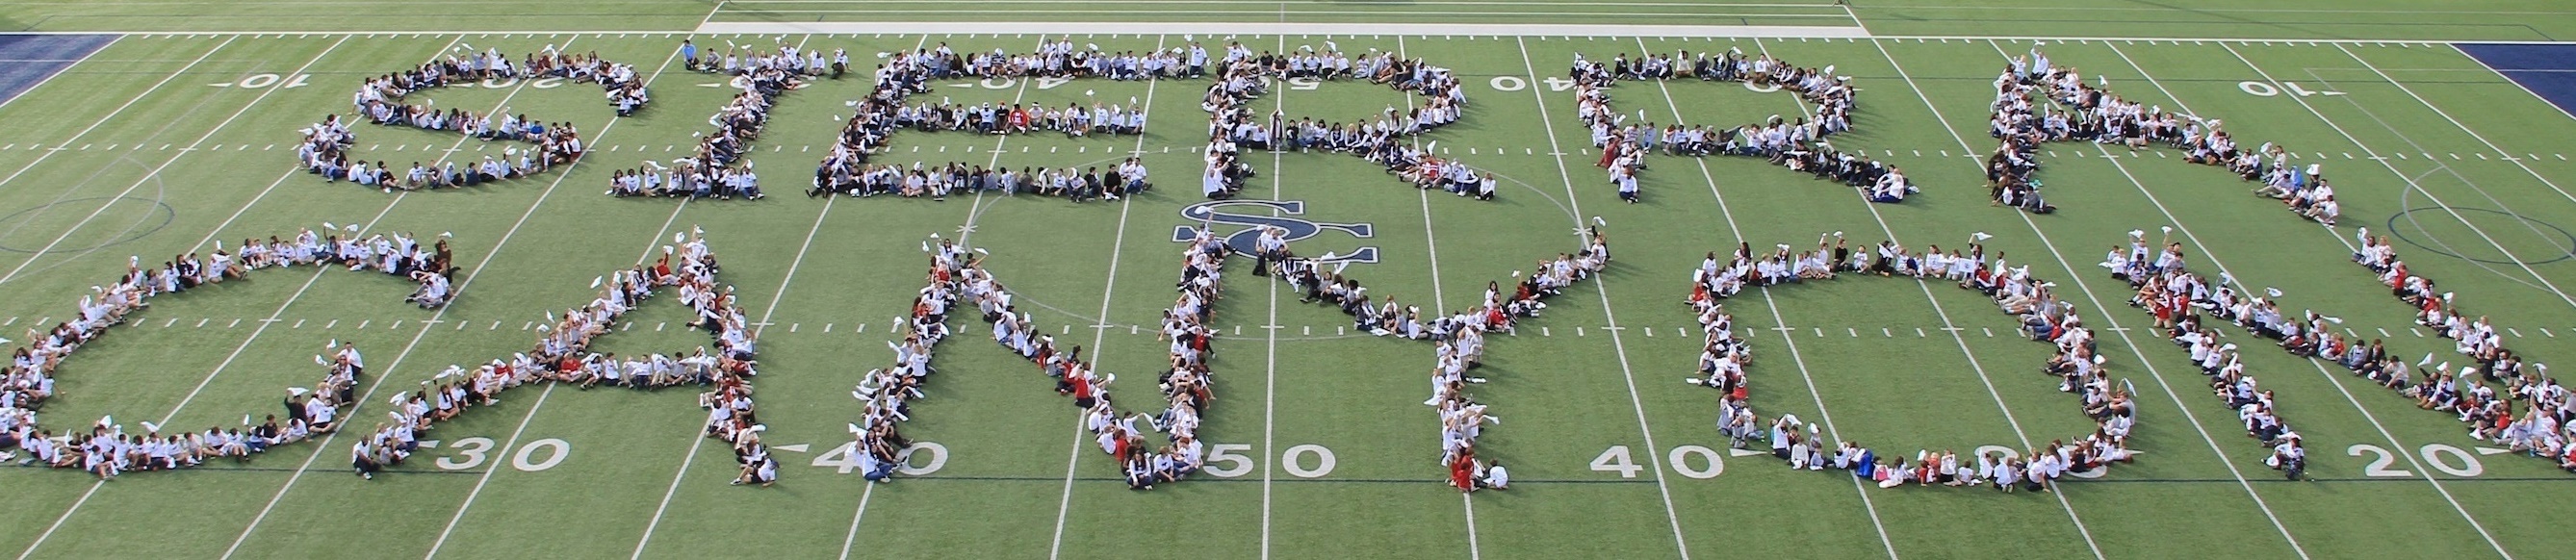 Sierra Canyon students spell out Sierra Canyon on the football field